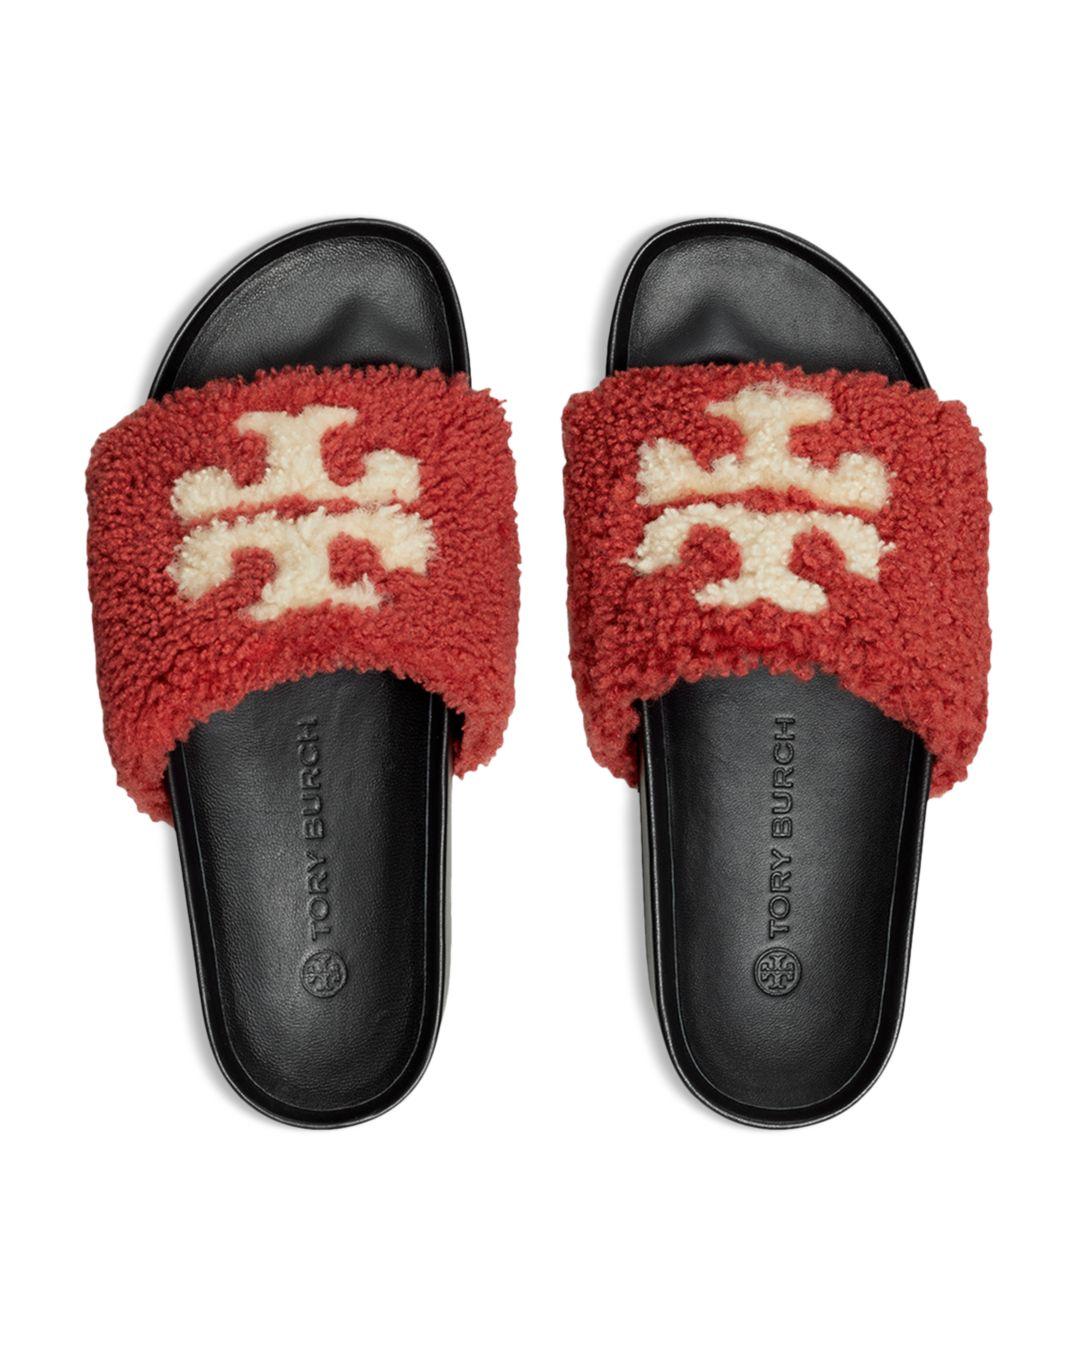 Tory Burch Double T Shearling Flatform Sandals in Red | Lyst